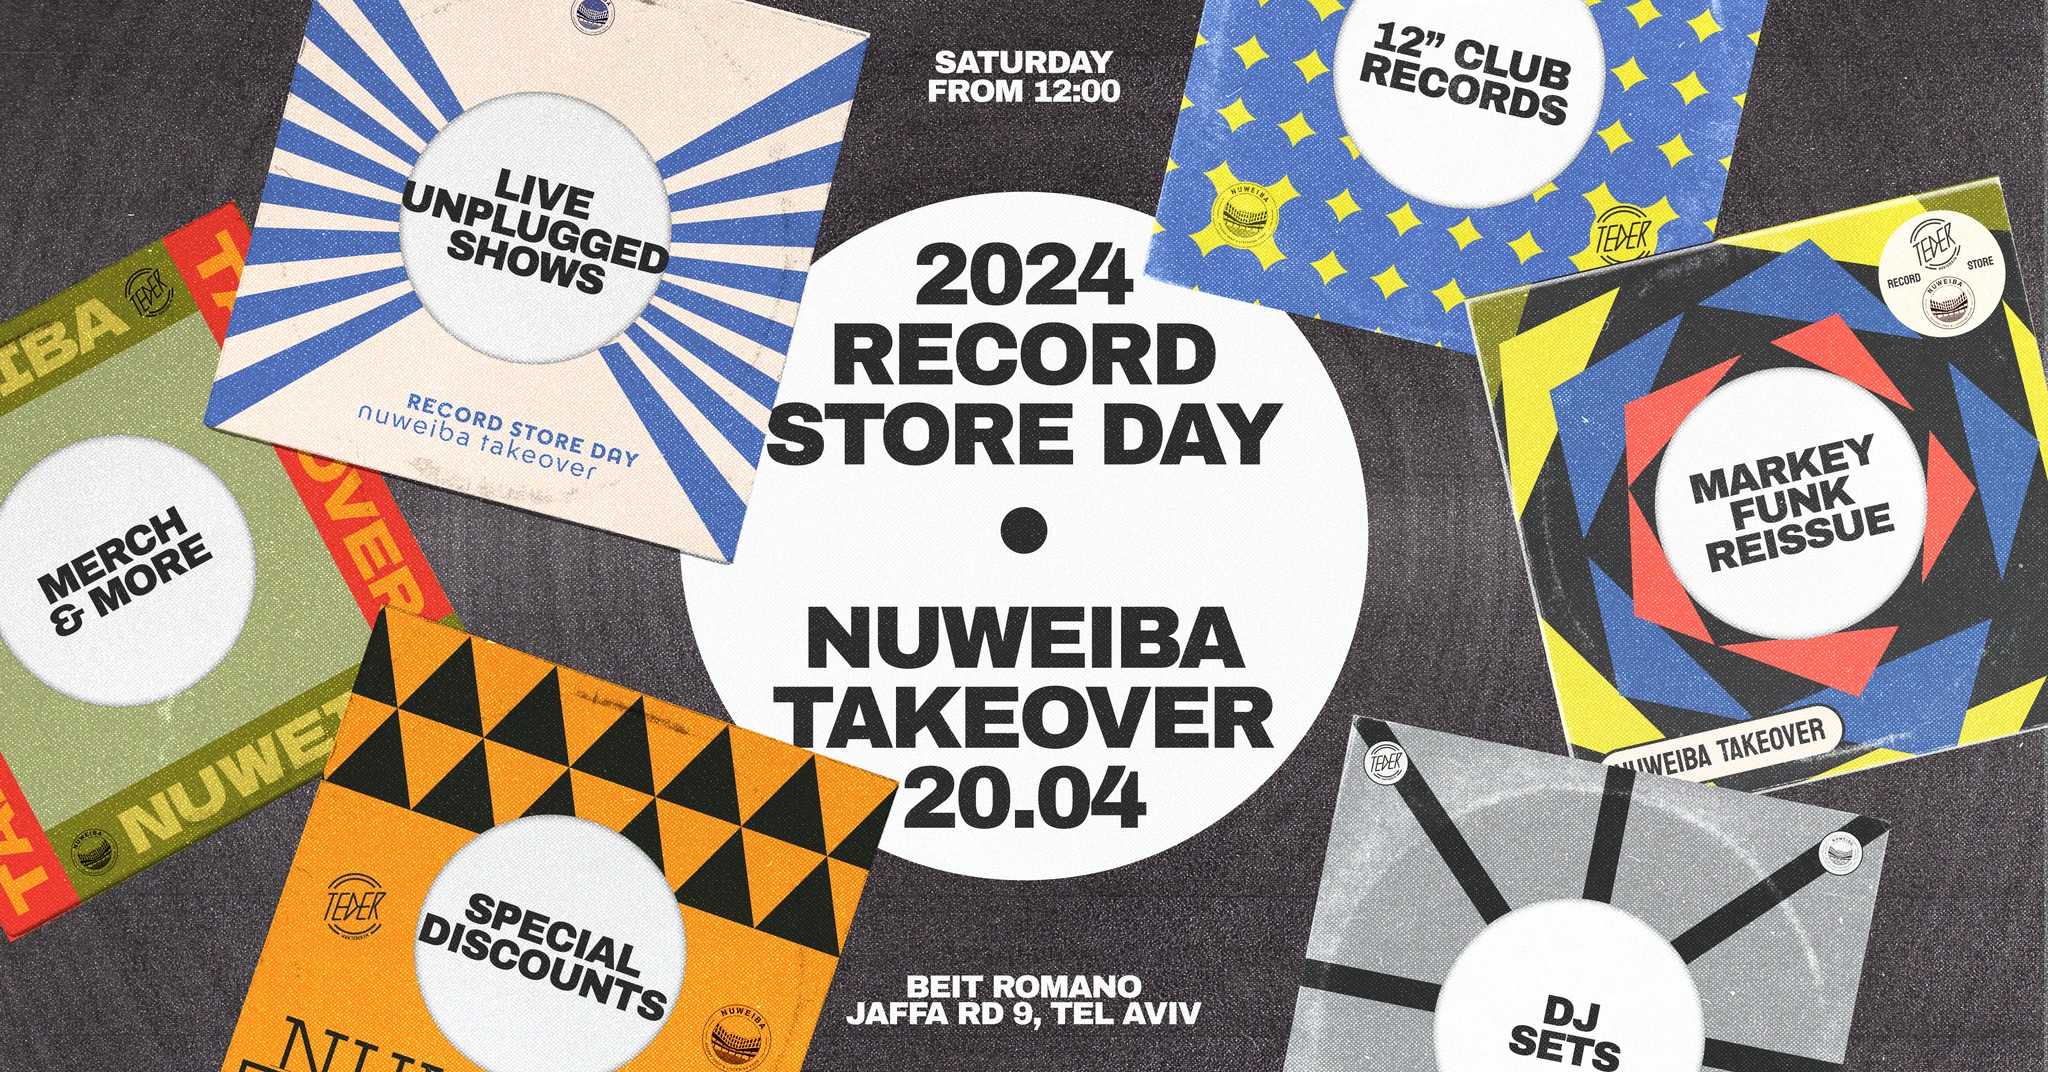 Record Store Day - Nuweiba Takeover @ Beit Romano